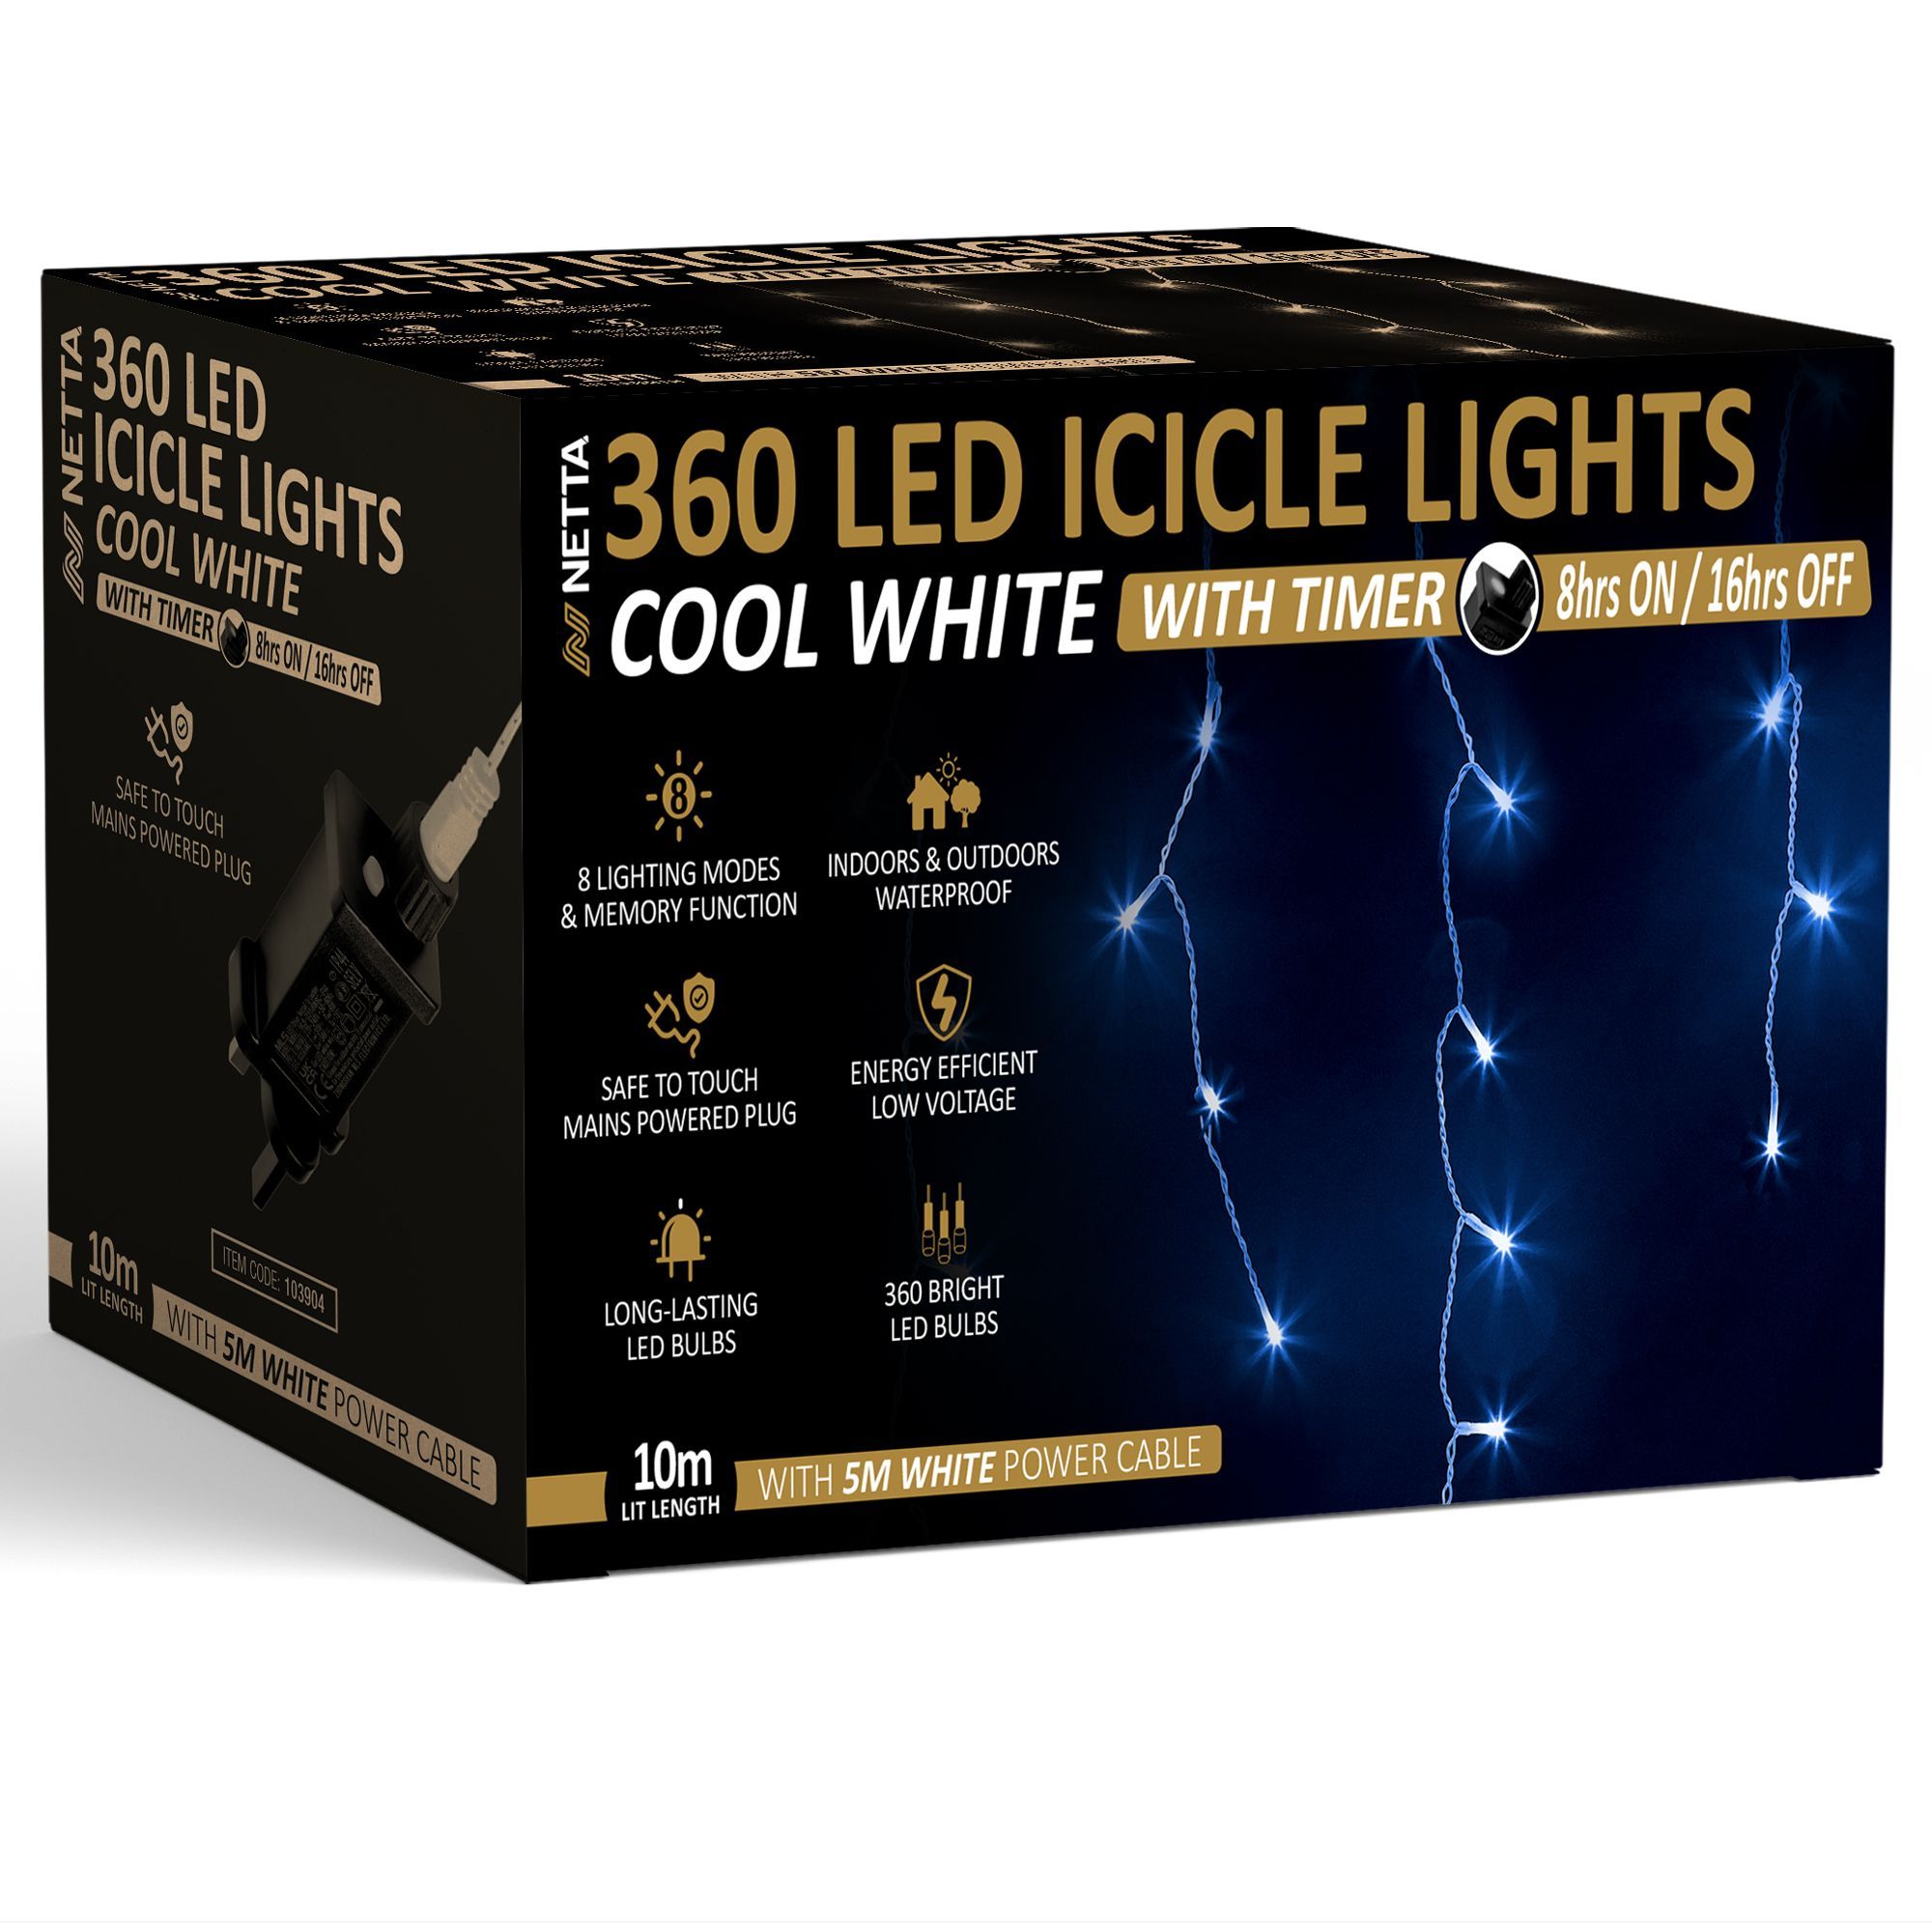 NETTA Icicle Lights 360 LED Outdoor Christmas Lights 10M Lit Length, Timer - Cool White, with White Cable